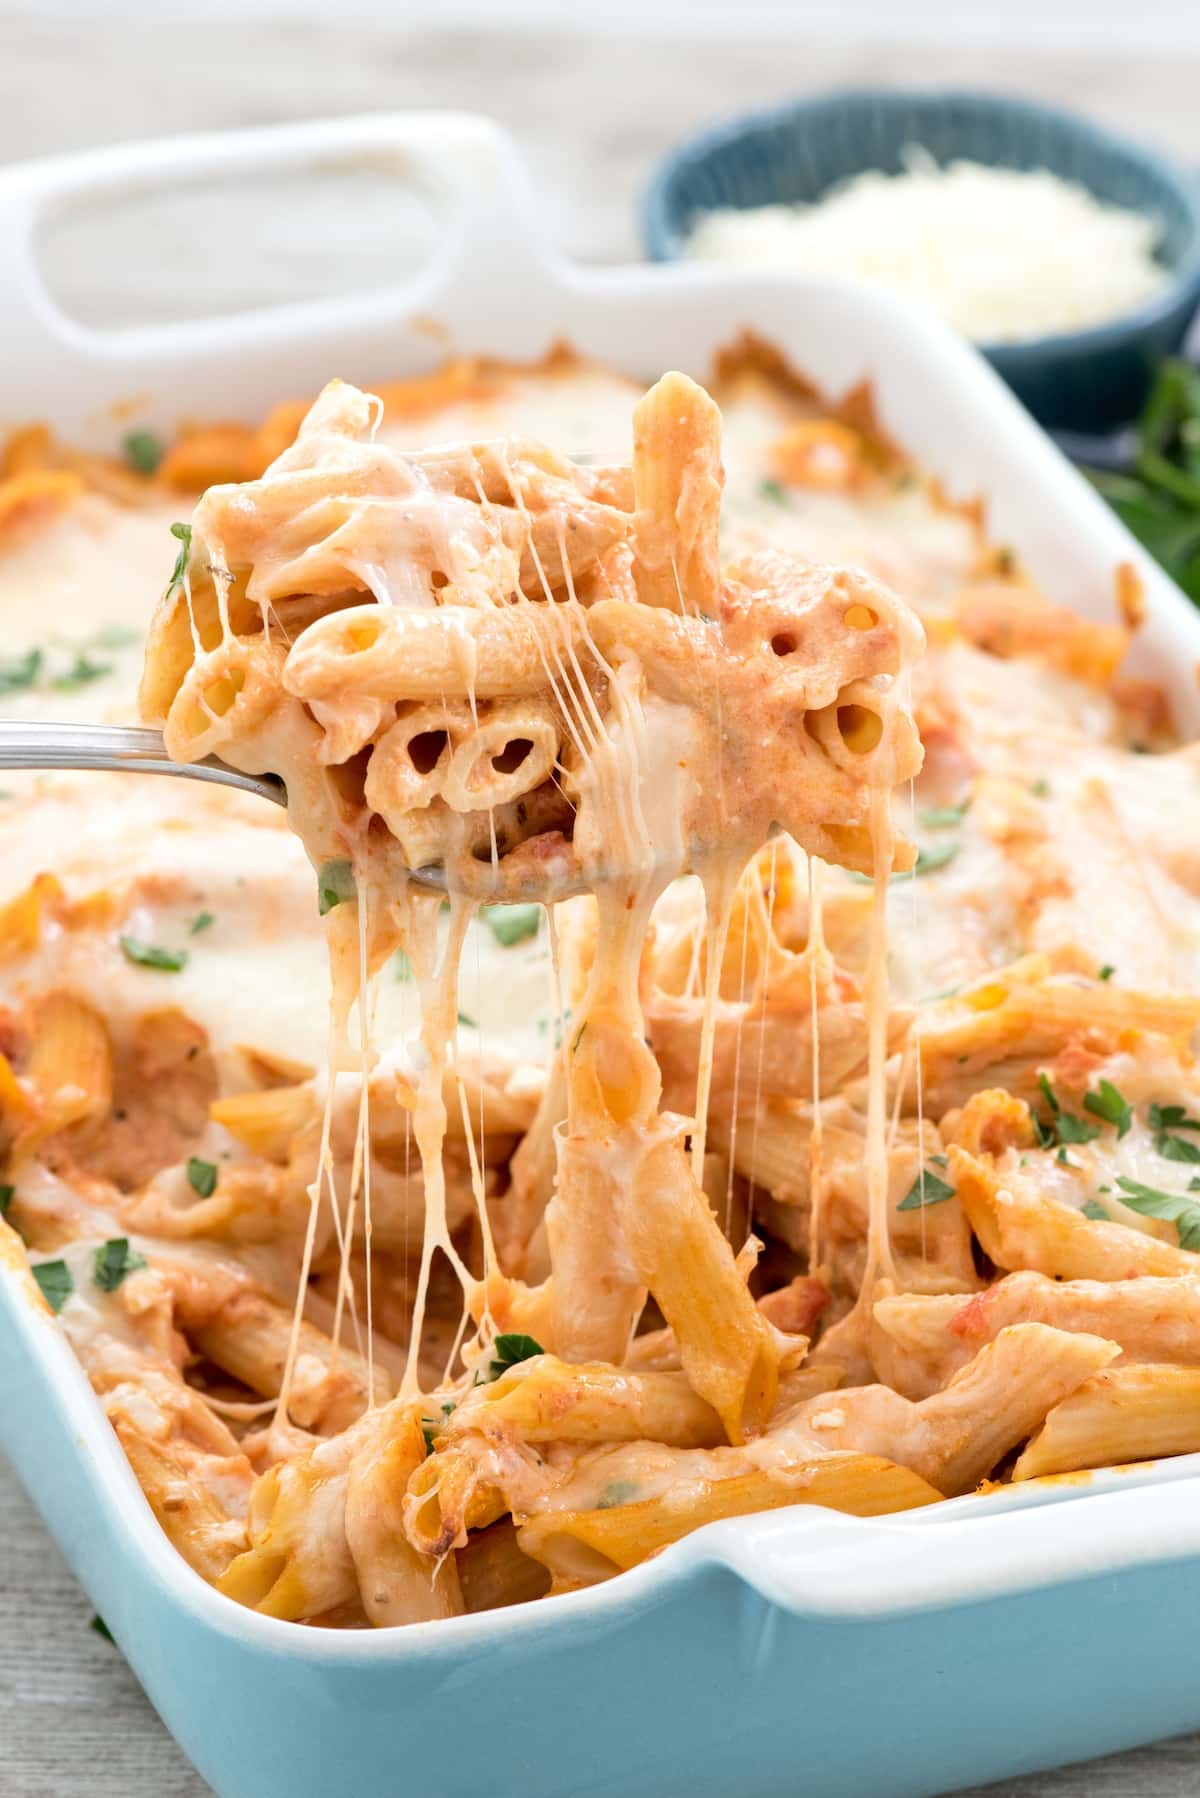 baked penne being scooped out of a teal pan with a silver spoon.